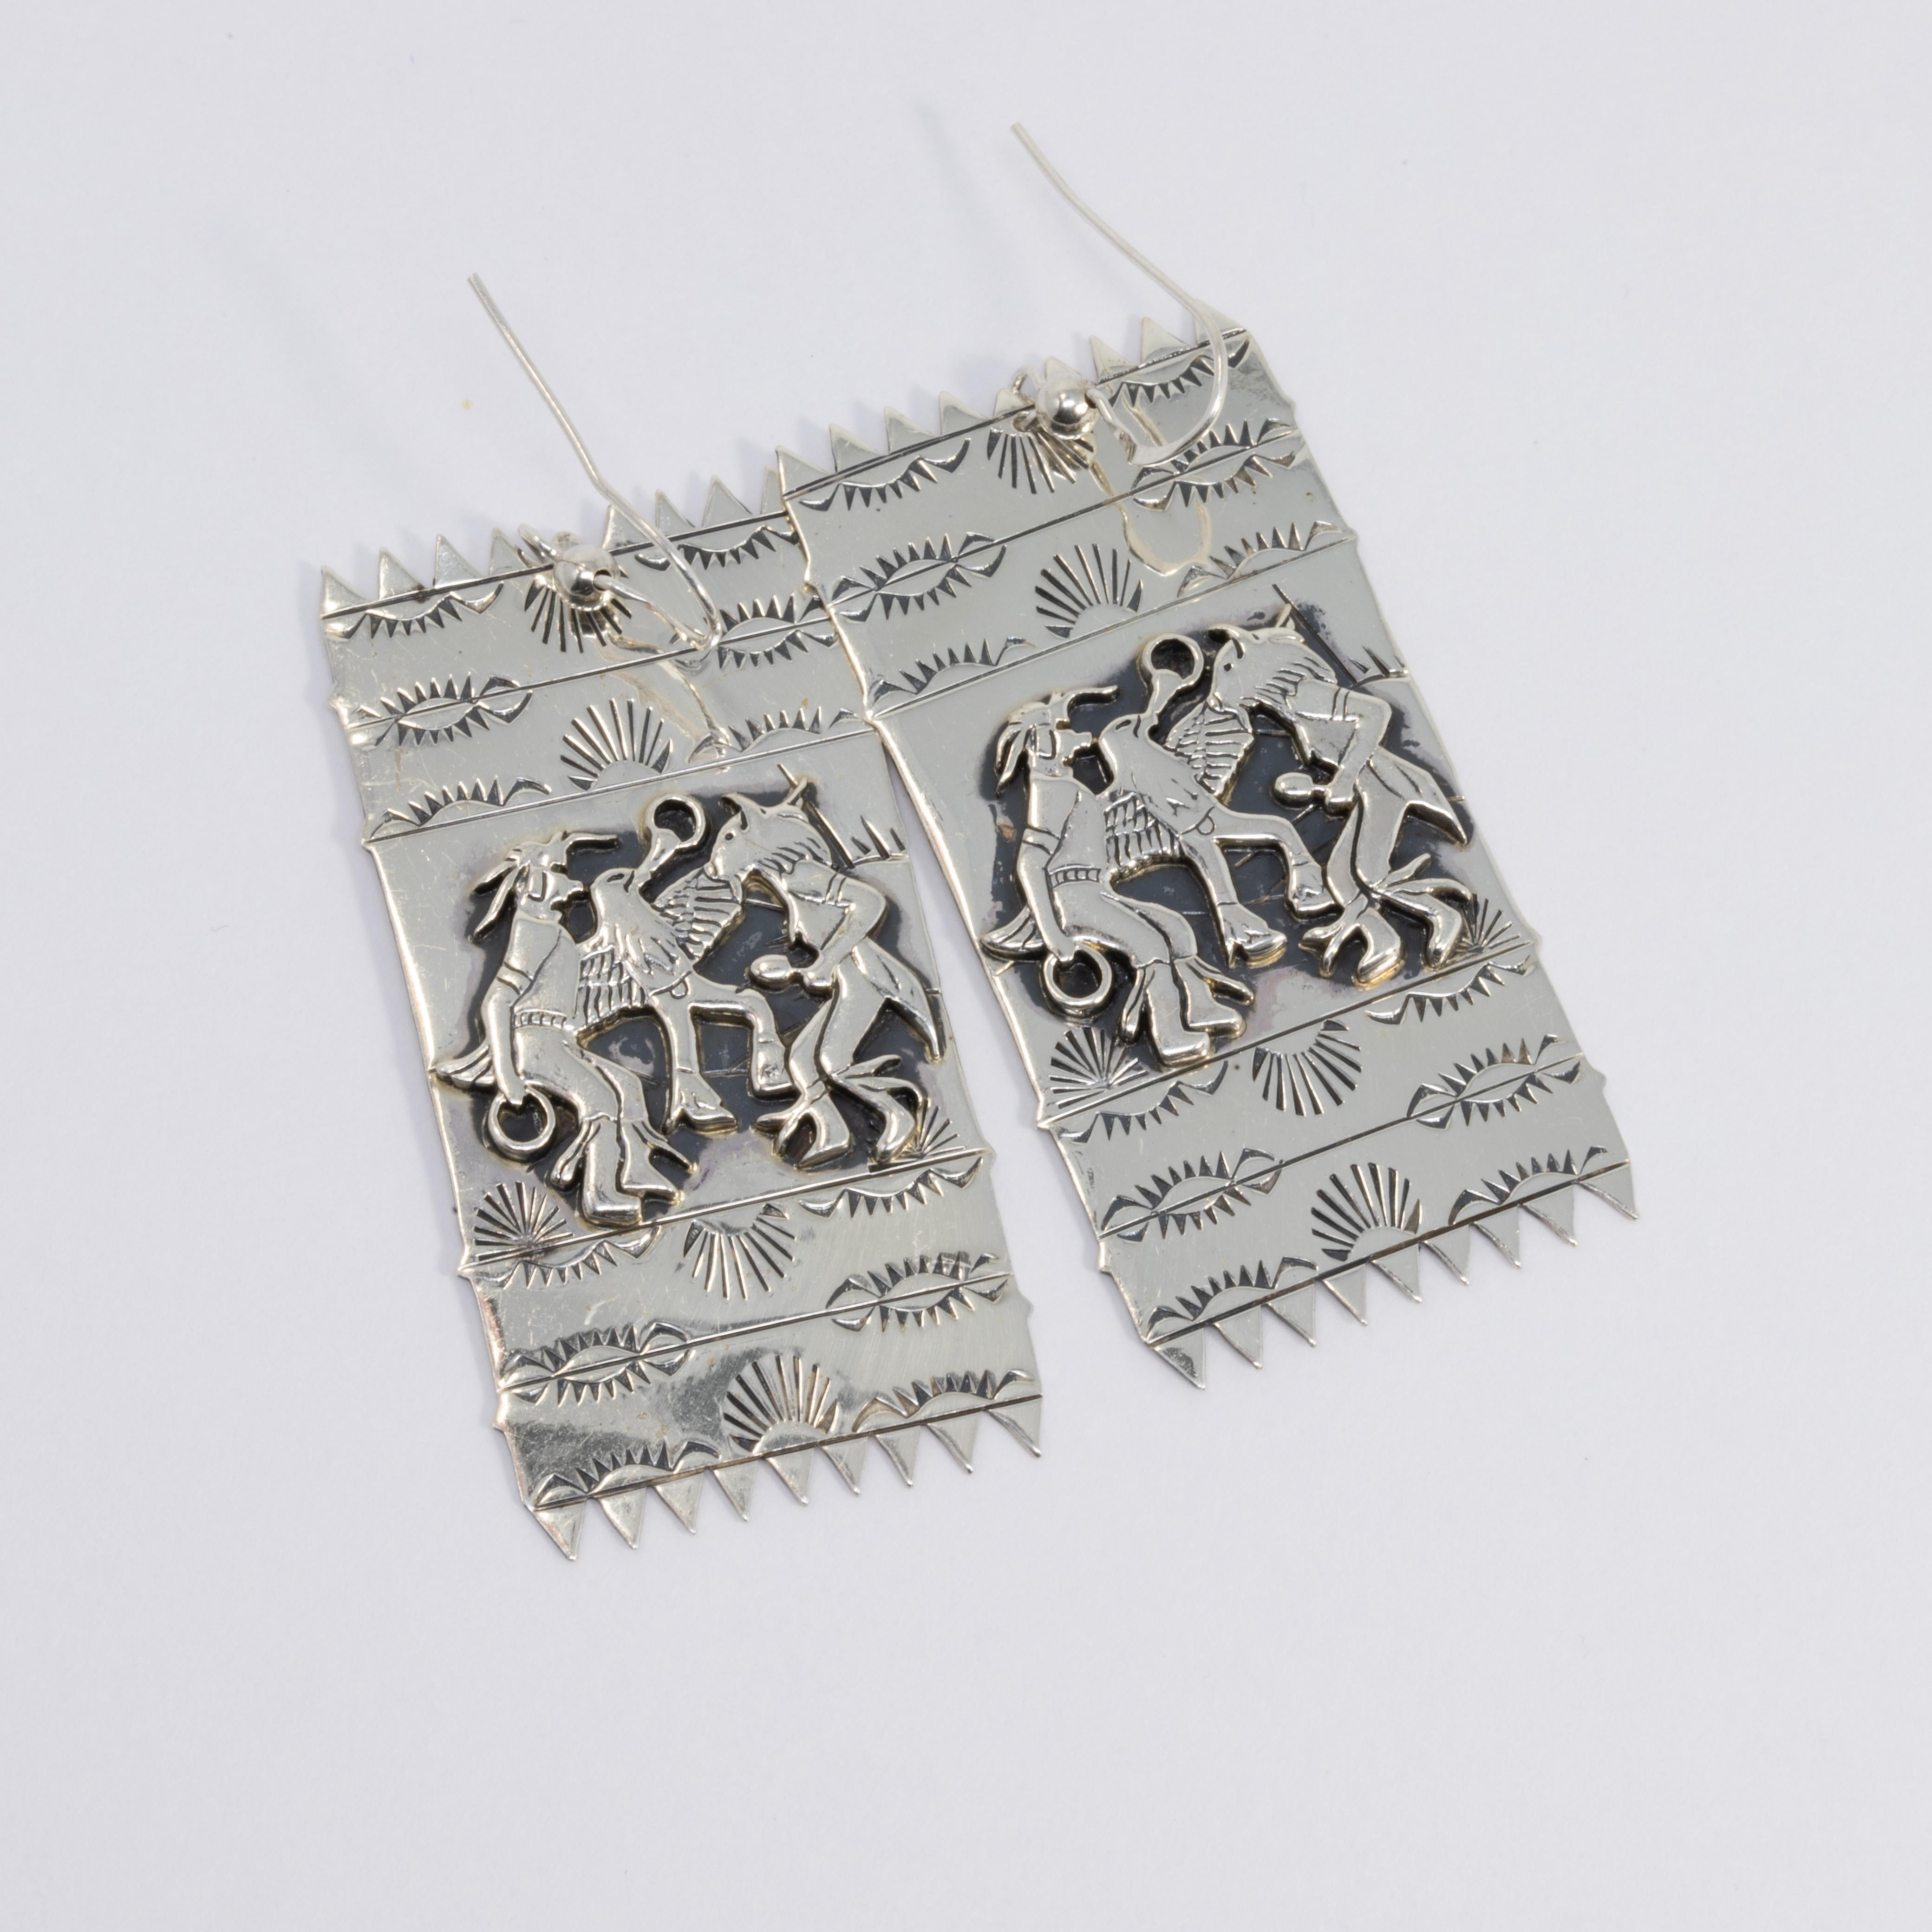 A pair of finely detailed sterling silver earrings, depicting three dancing Native American deities. Rectangular shape with polished sawtooth ends.

Hallmarks: STER © SC